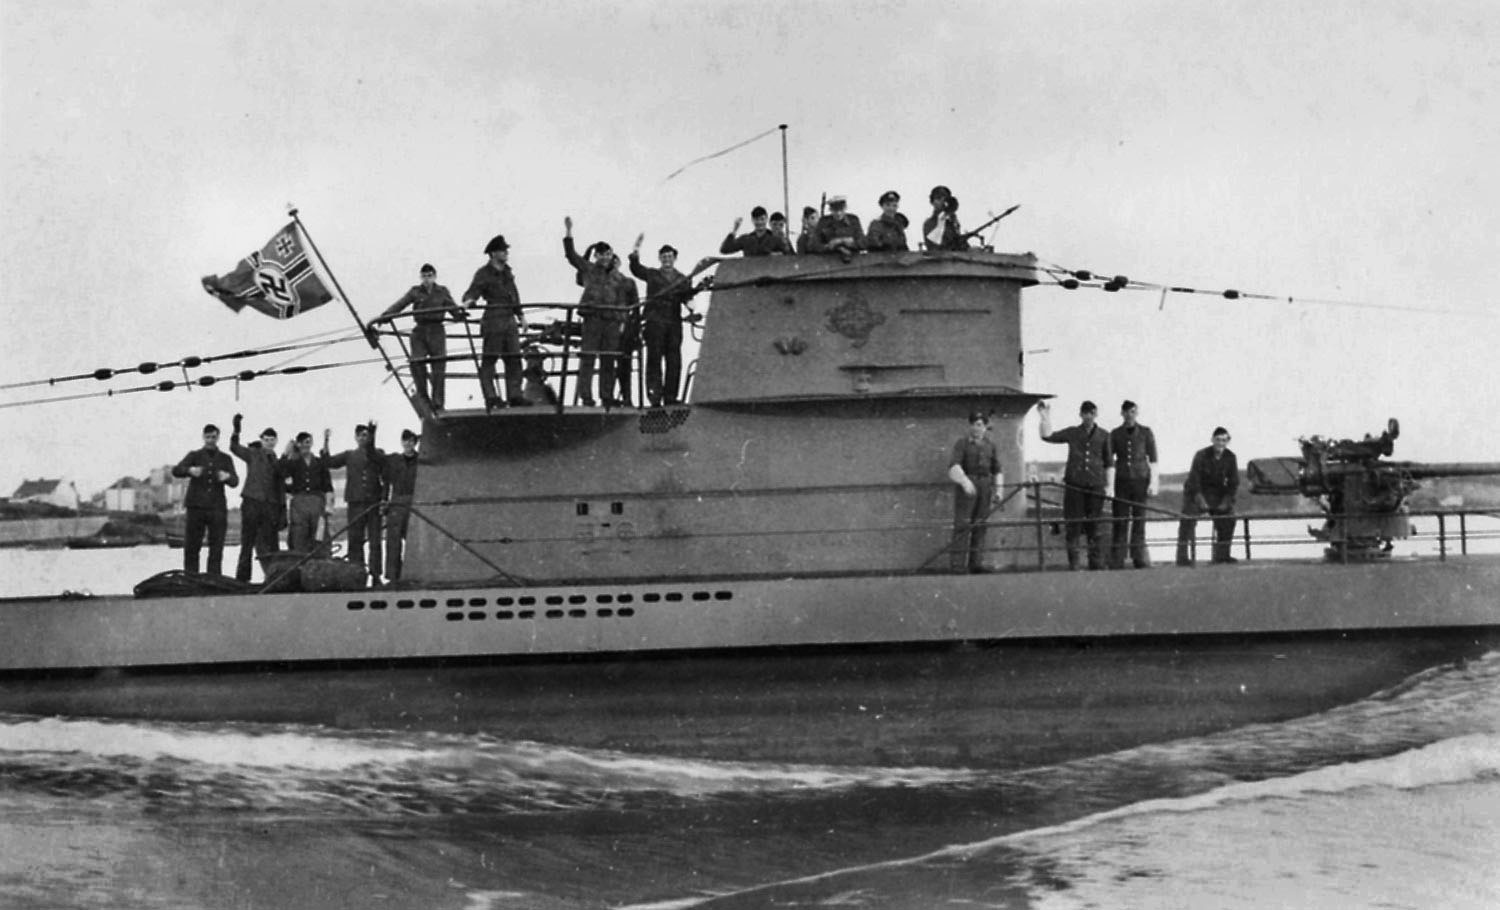 Venerable U-203 had a long run of success sinking 23 Allied ships over a four-year period until the British sank it in April 1943. 